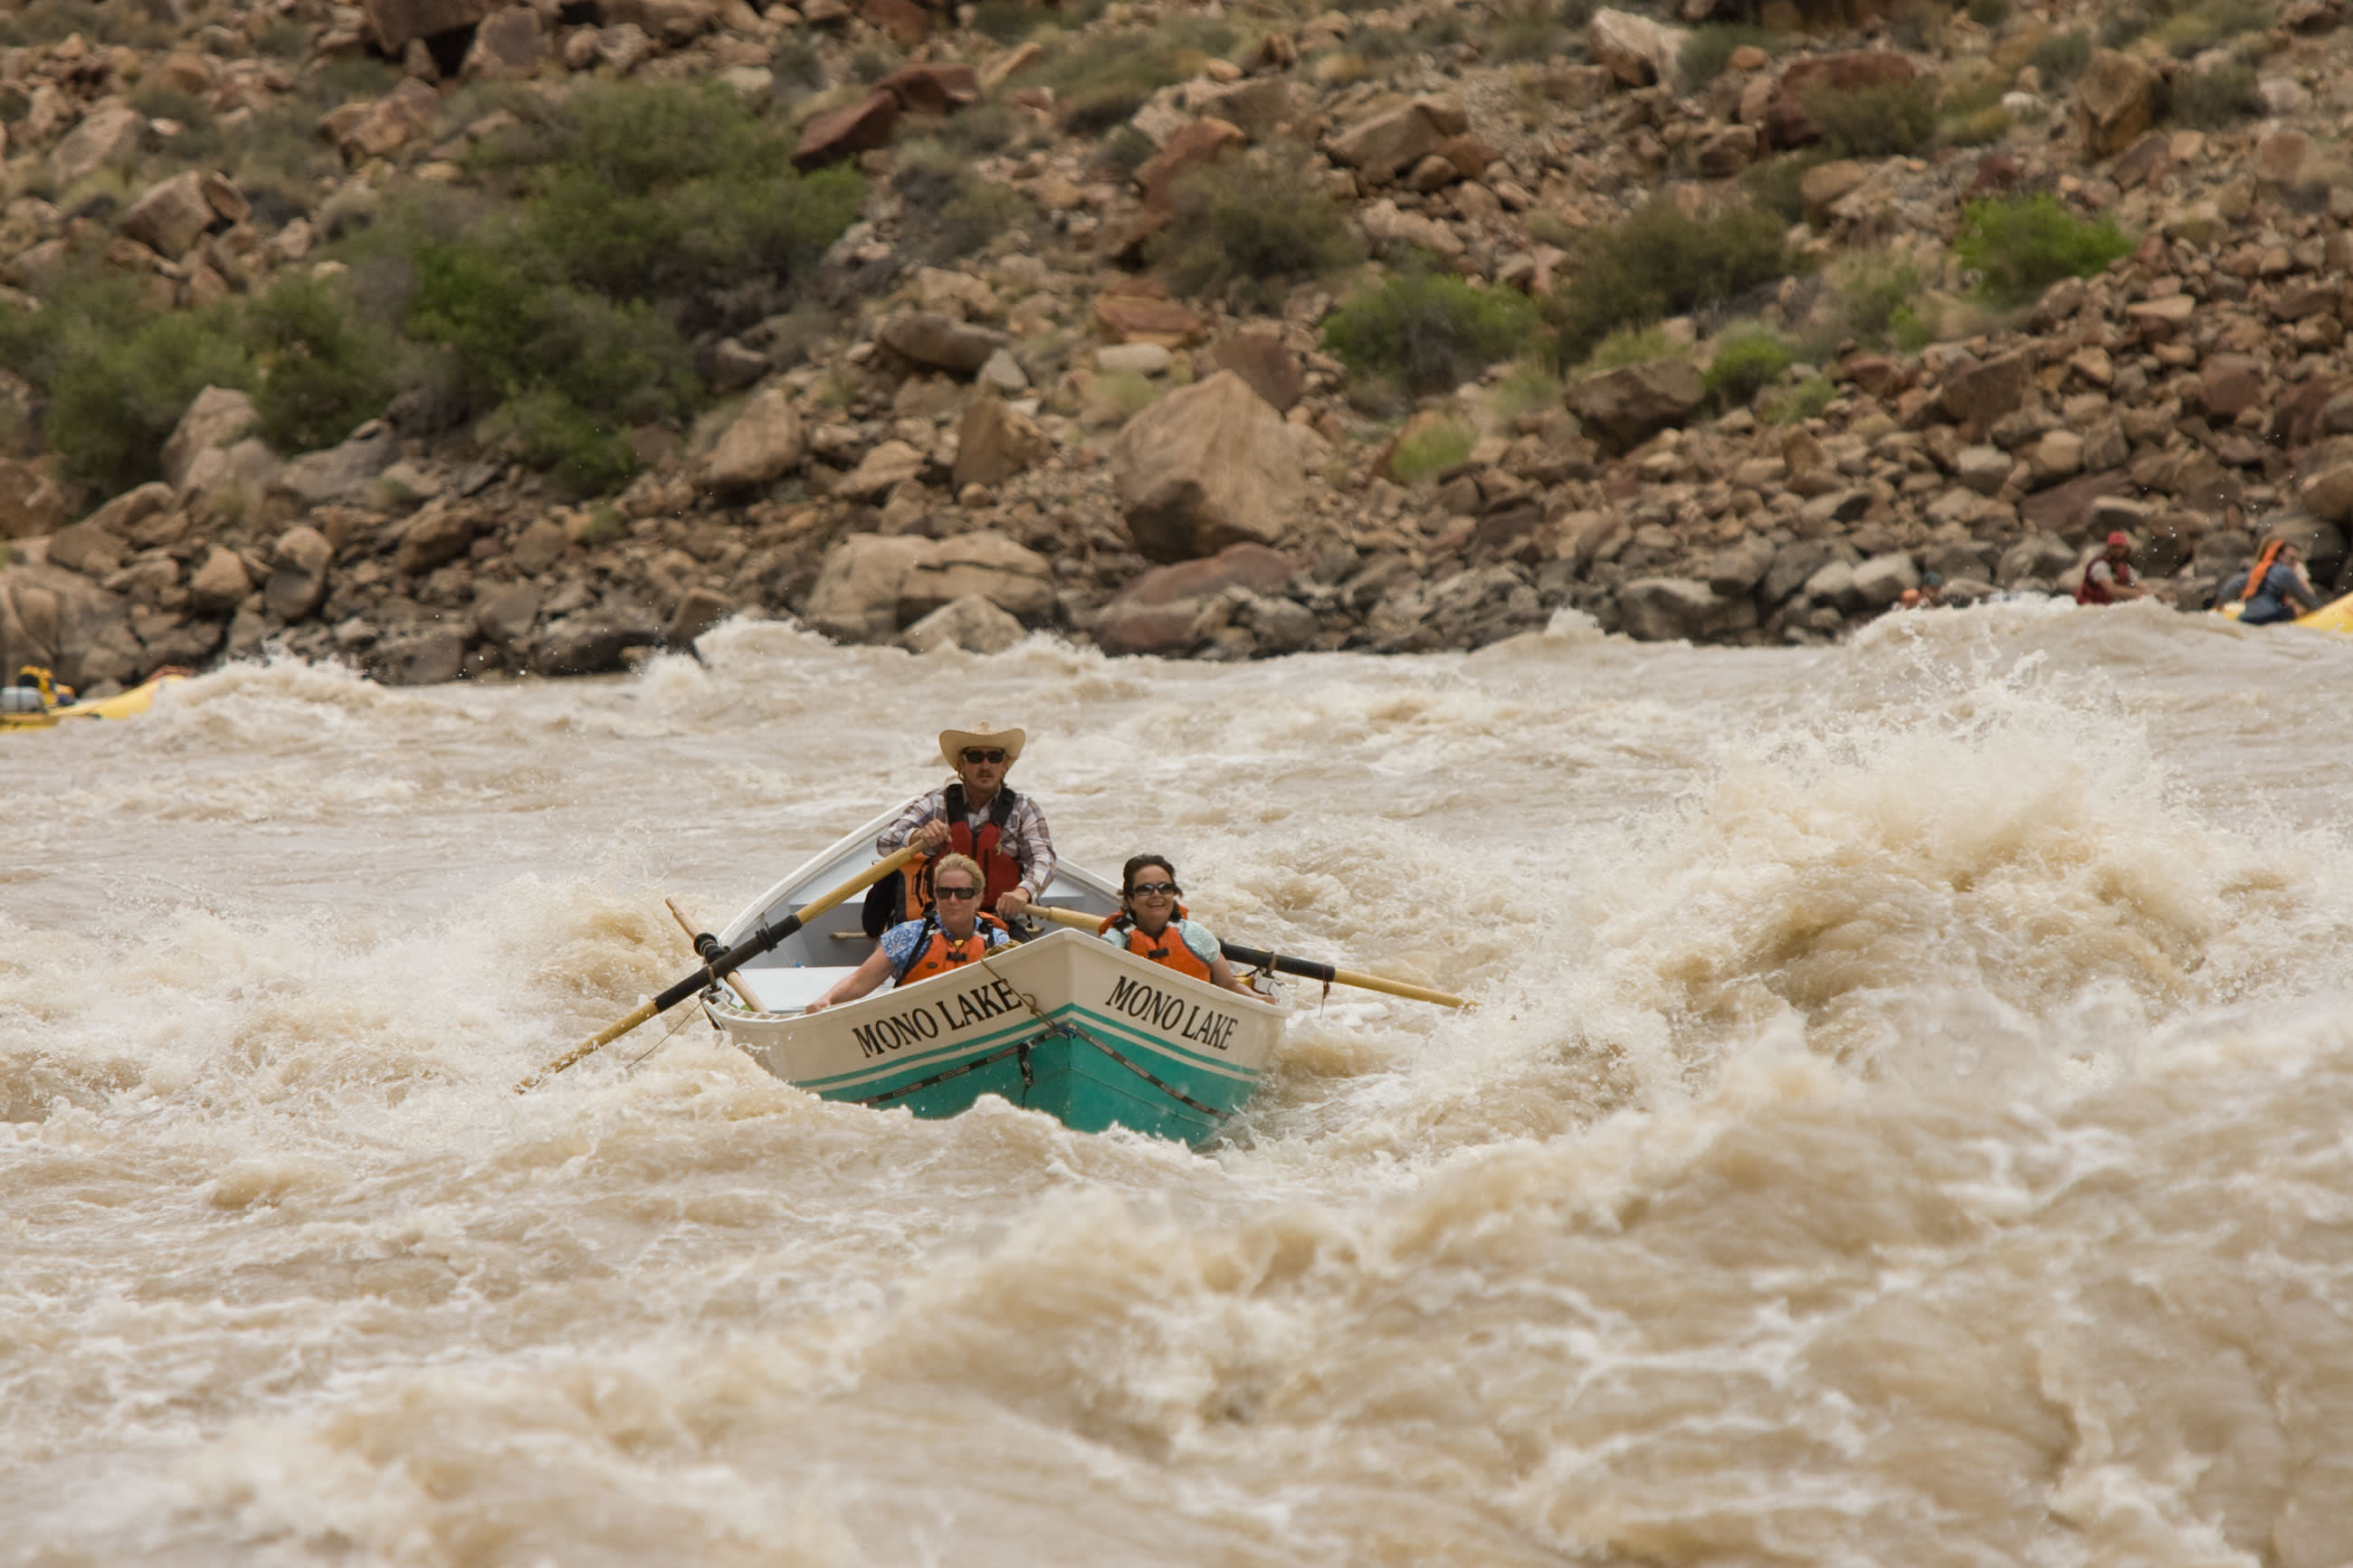 The Ultimate Way to Explore Canyonlands National Park? By Raft